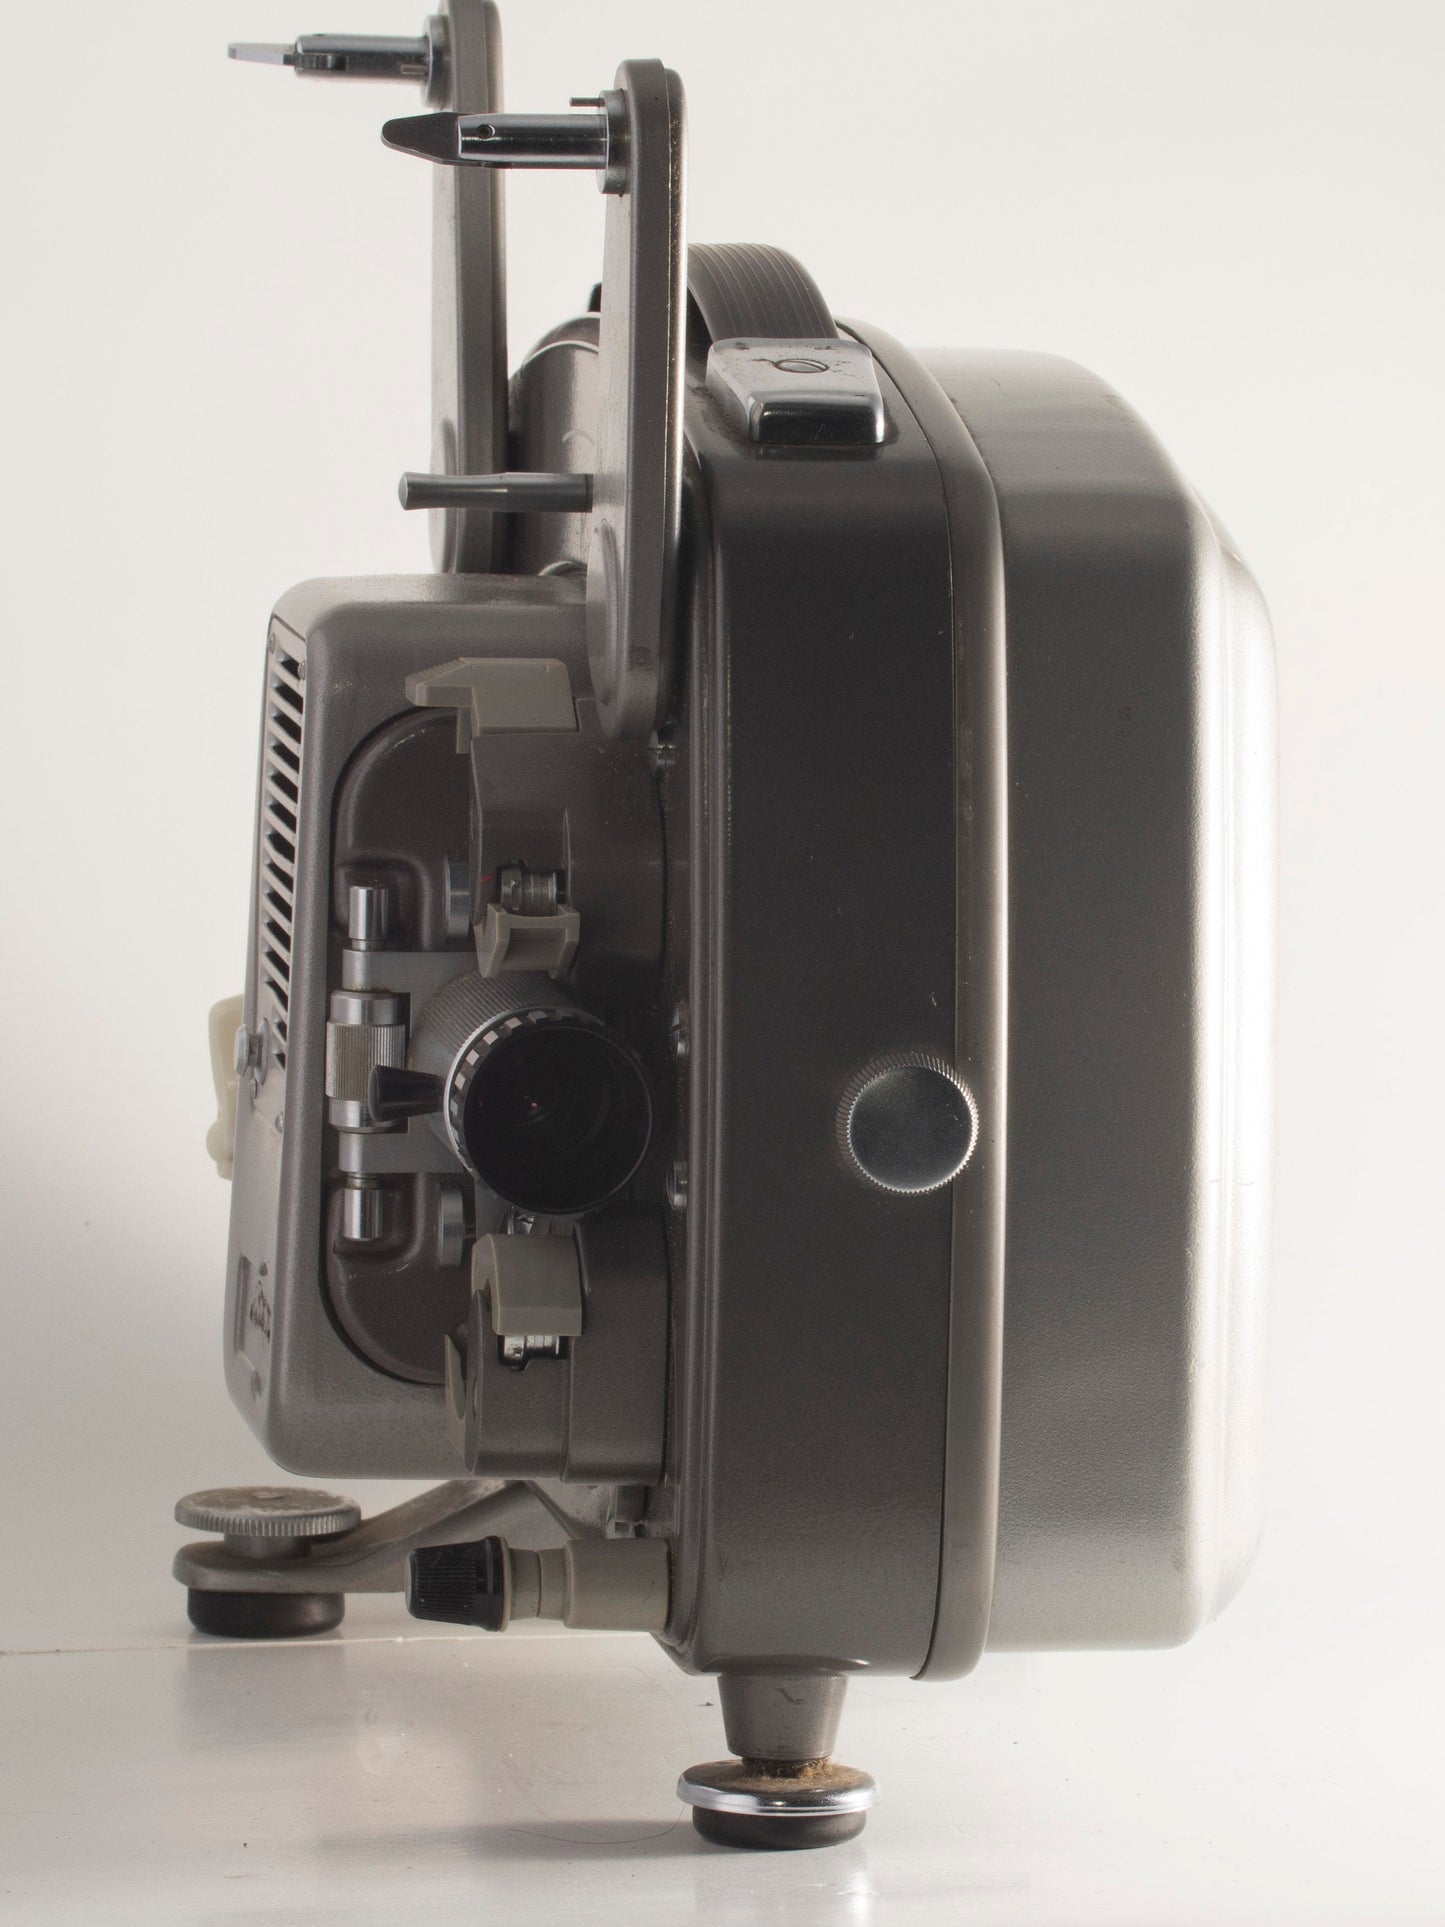 Bolex-Paillard 18-5 Super 8 projector, 1965. One r says Built like  a tank, but it's also built like a watch. Very little plastic here besides  the main control knob, which glows in